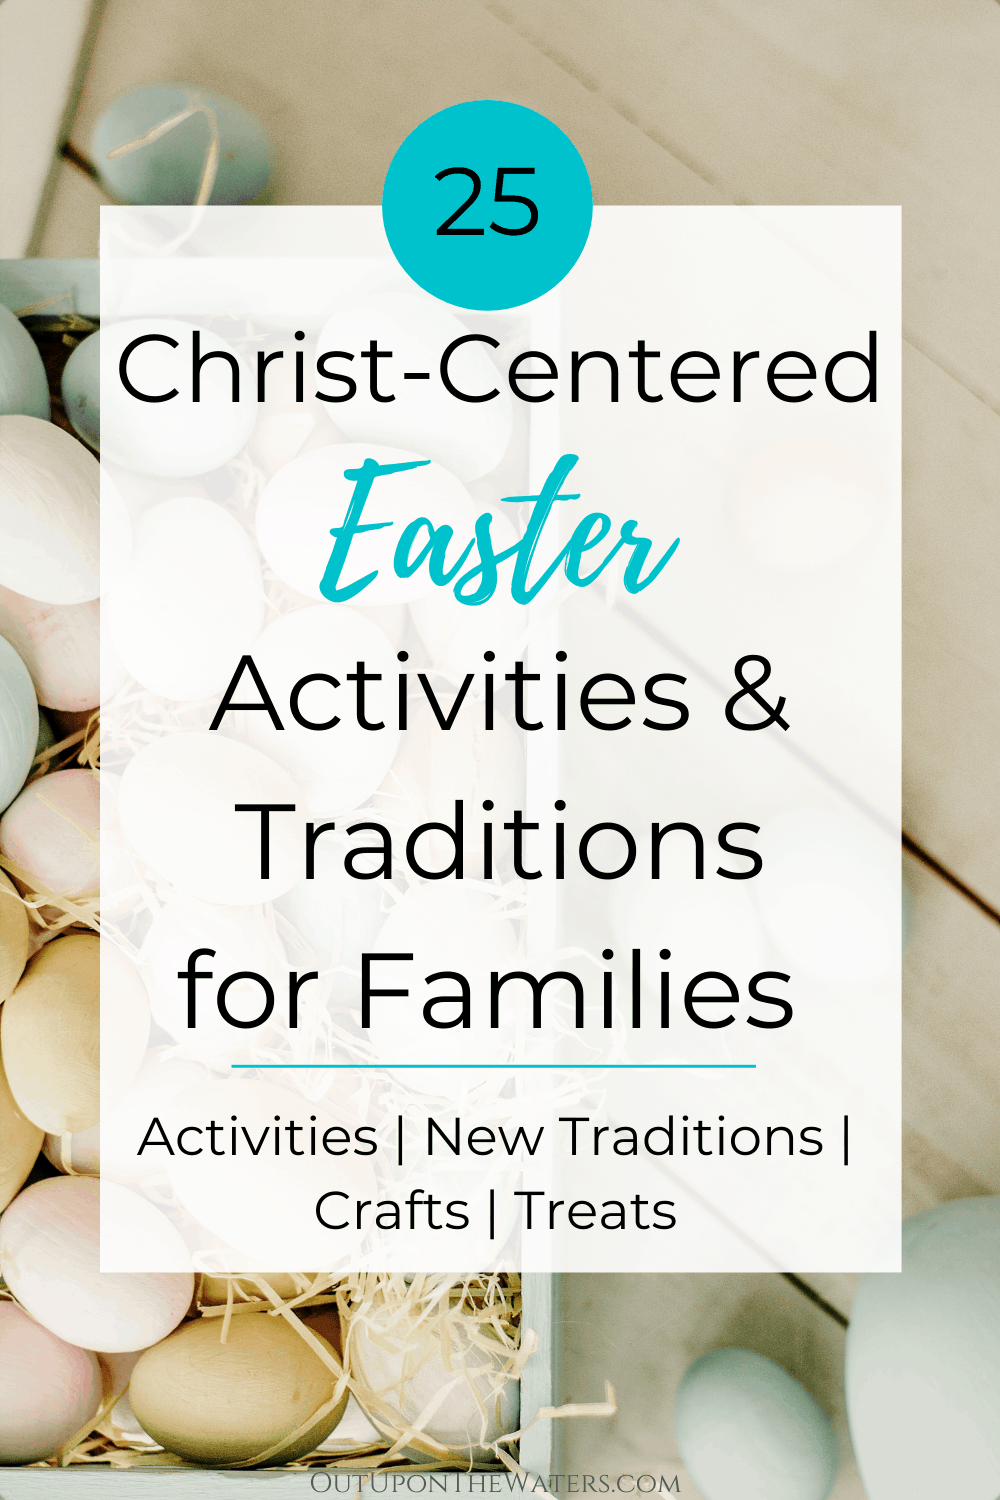 Christ-Centered Easter Traditions and Activities for Families